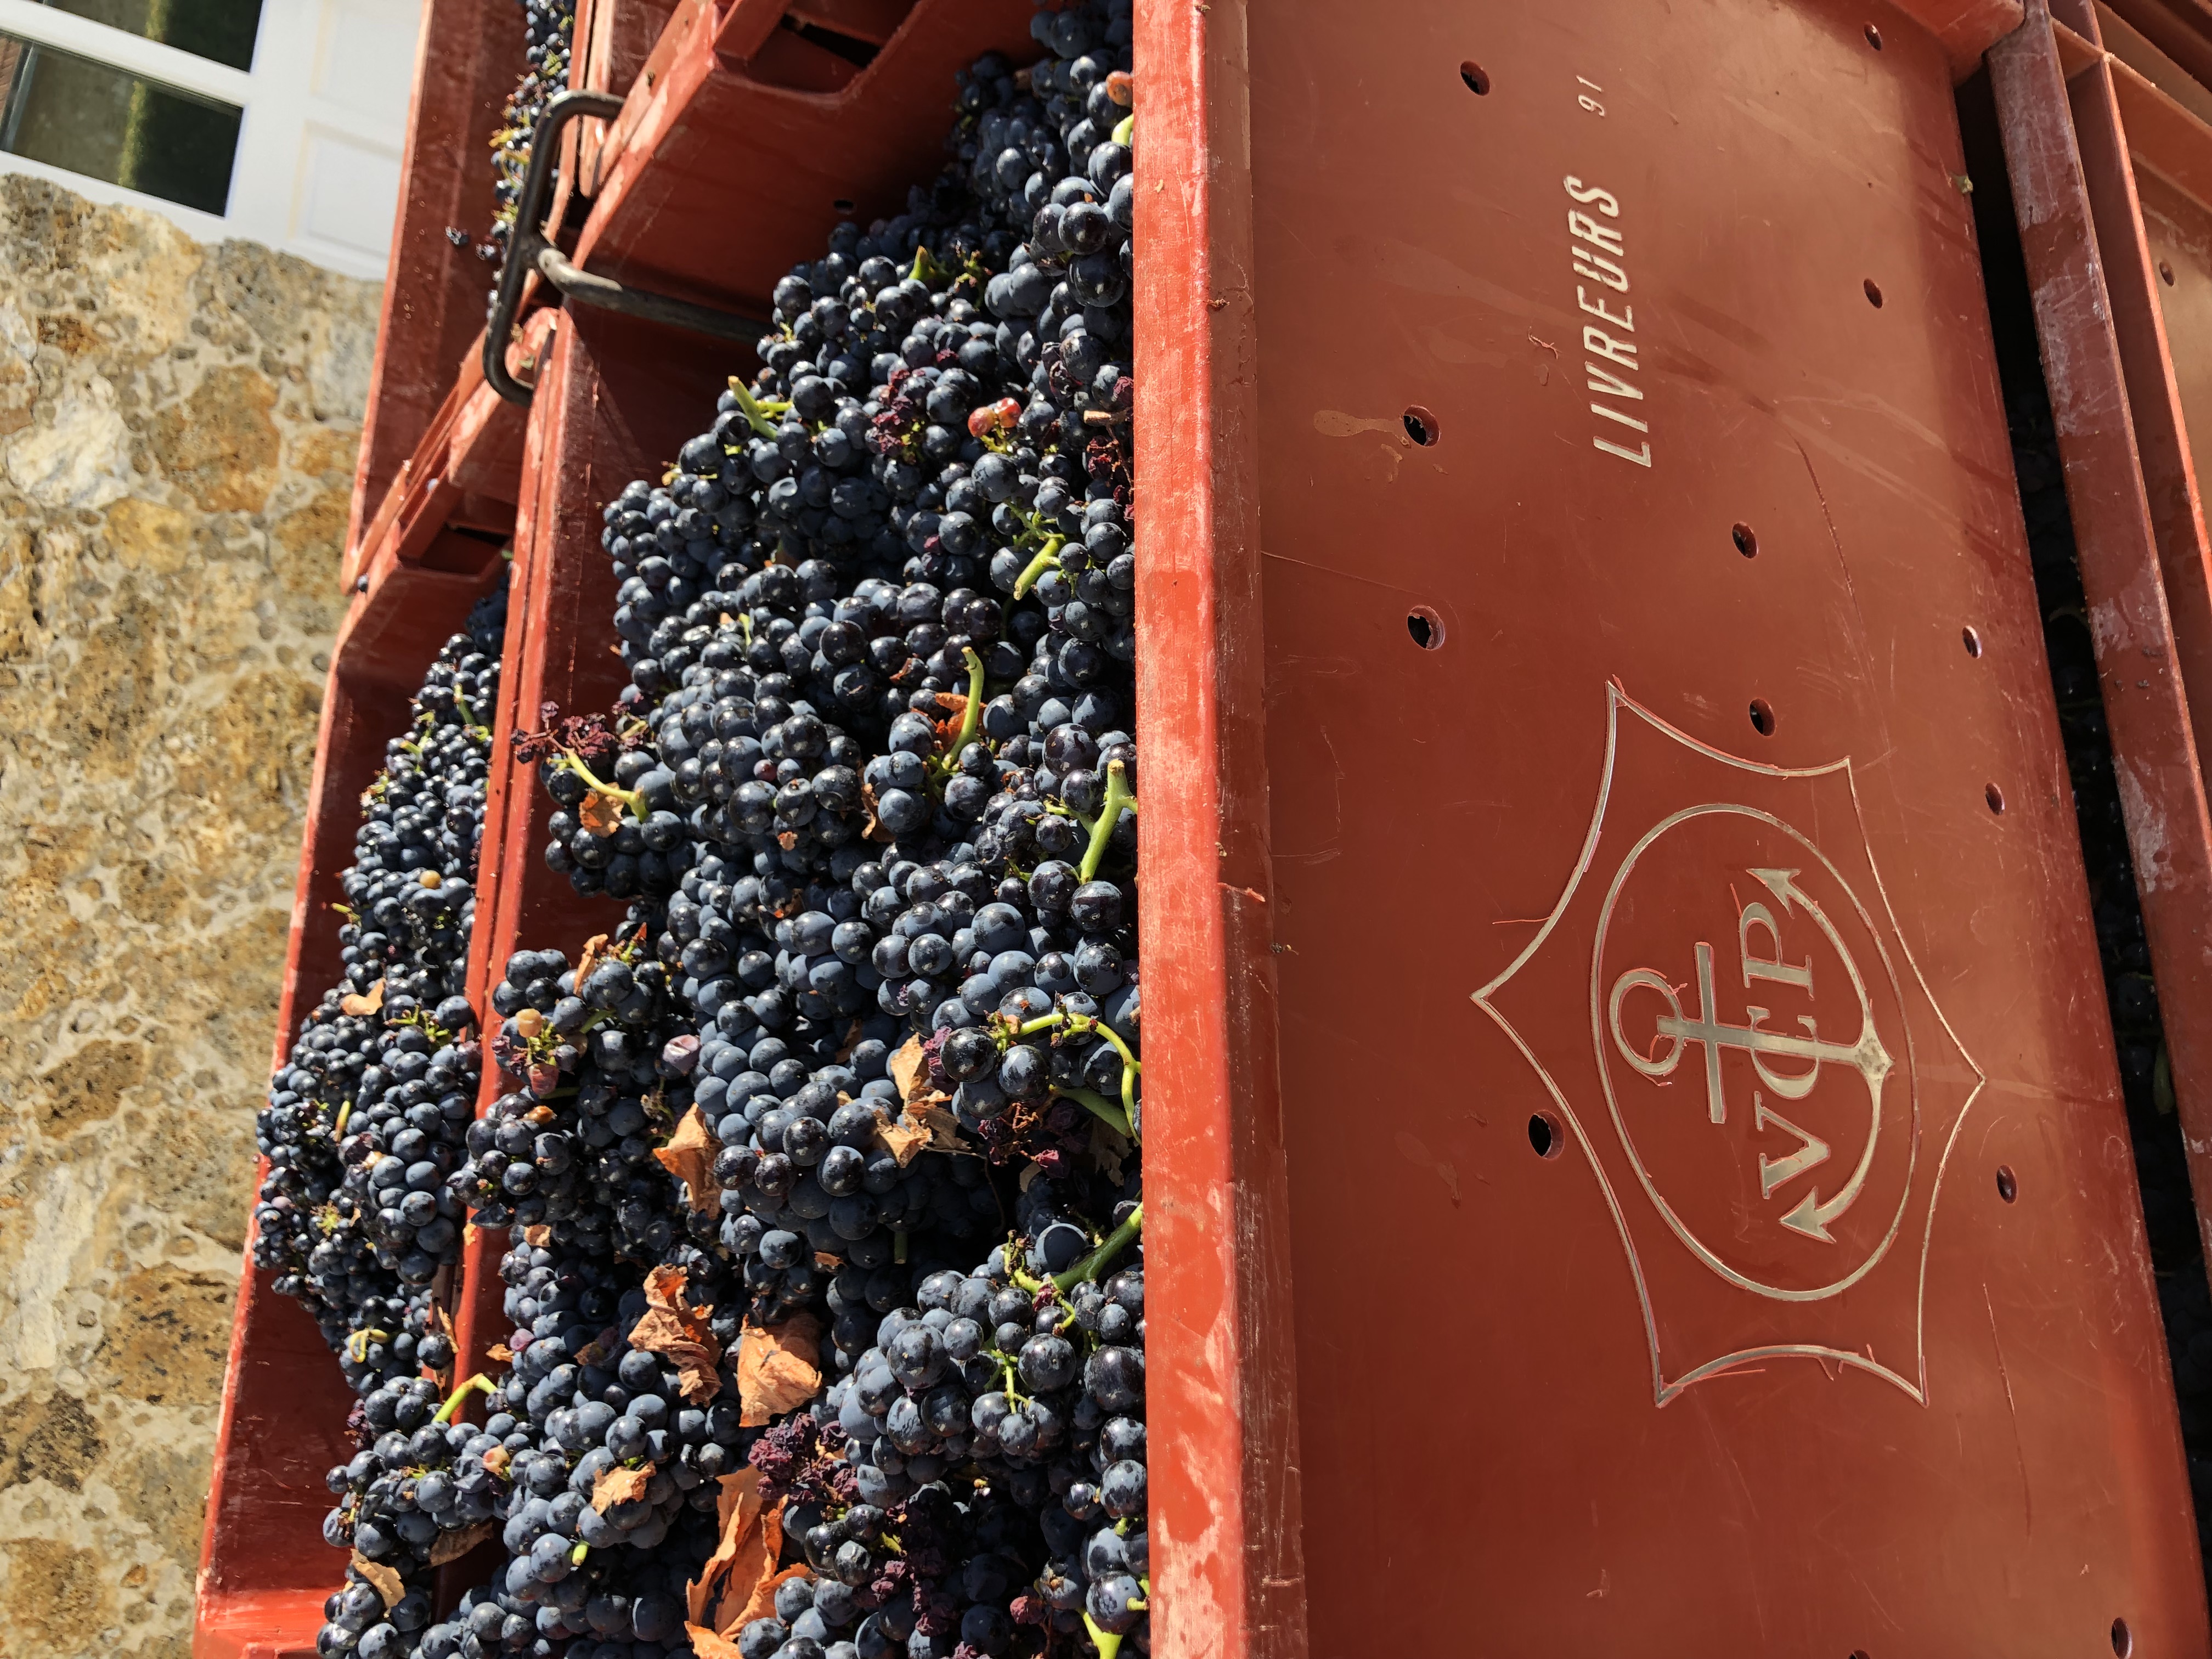 Crates of grapes just picked off the vines during harvest season at Veuve Clicquot’s vineyards